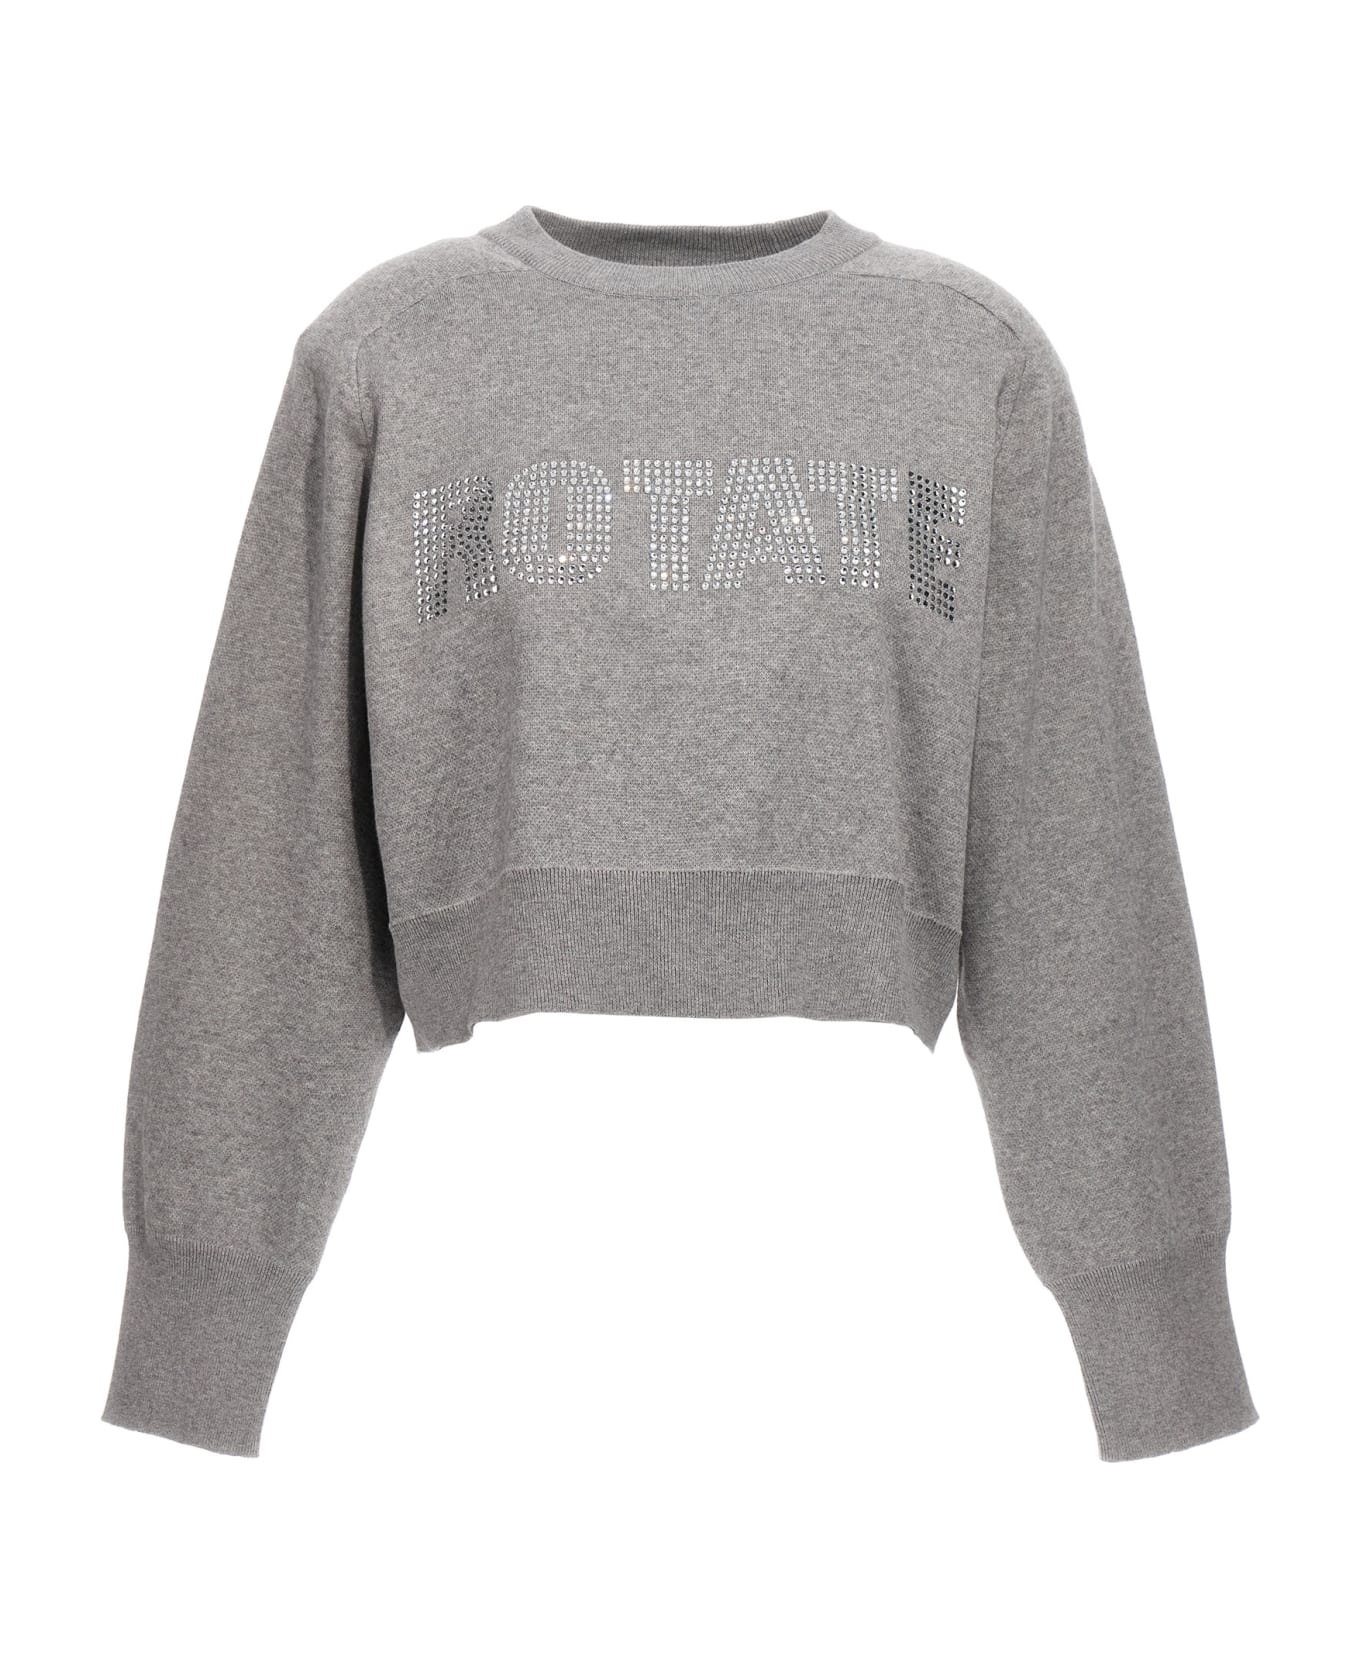 Rotate by Birger Christensen 'firm Knit Cropped' Sweater - Gray